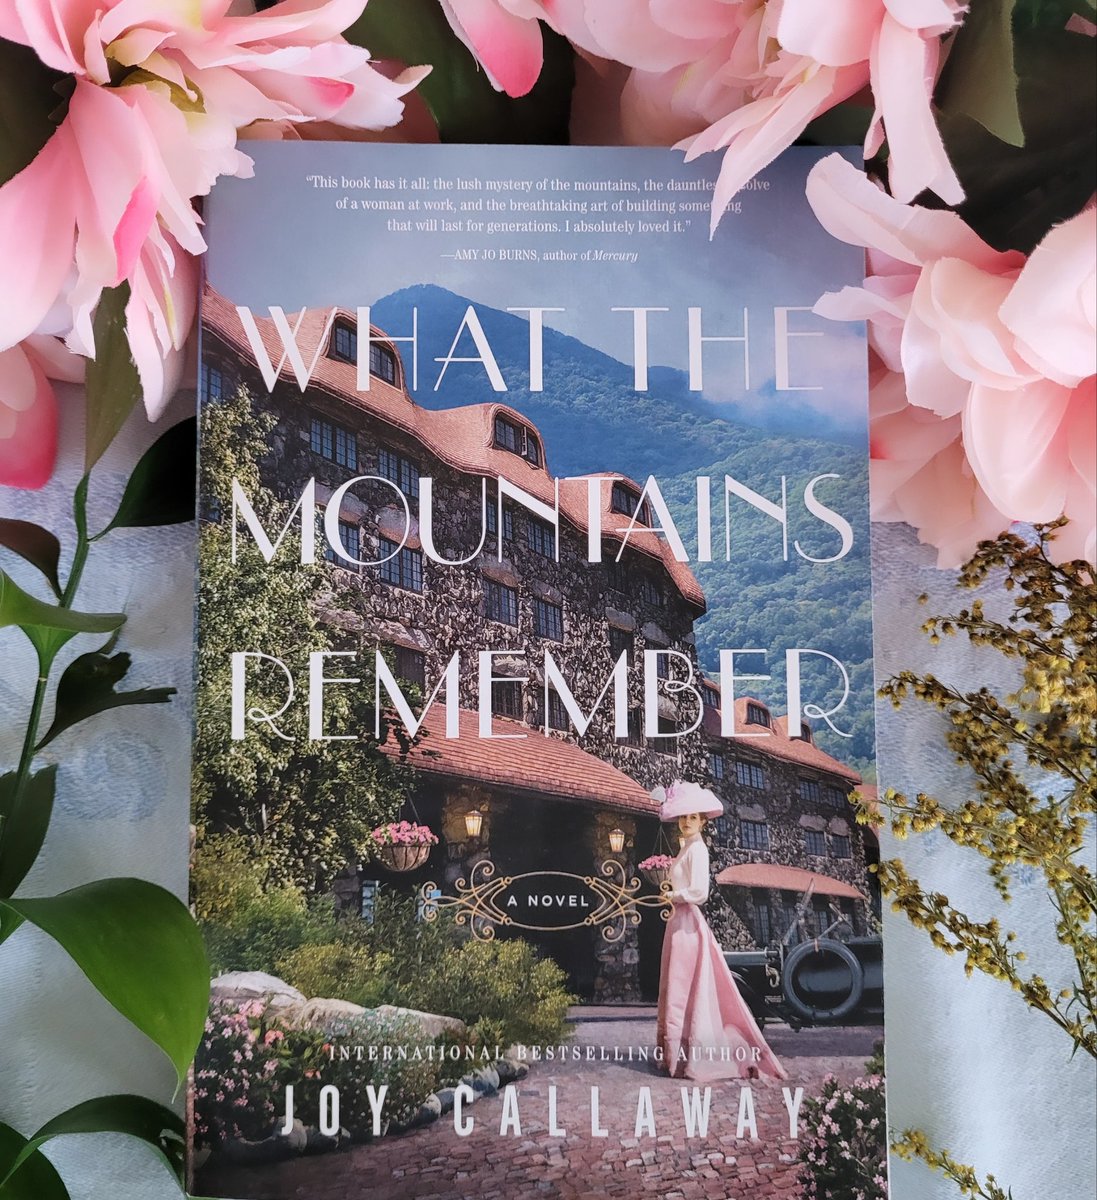 #WhattheMountainsRemember by Joy Callaway was an excellent #historicalfiction novel with a great unique setting, interesting characters, and wonderful romance.  #JoyCallaway @harpermusebooks @Austenprose #bookx
#southernfiction #newbooks